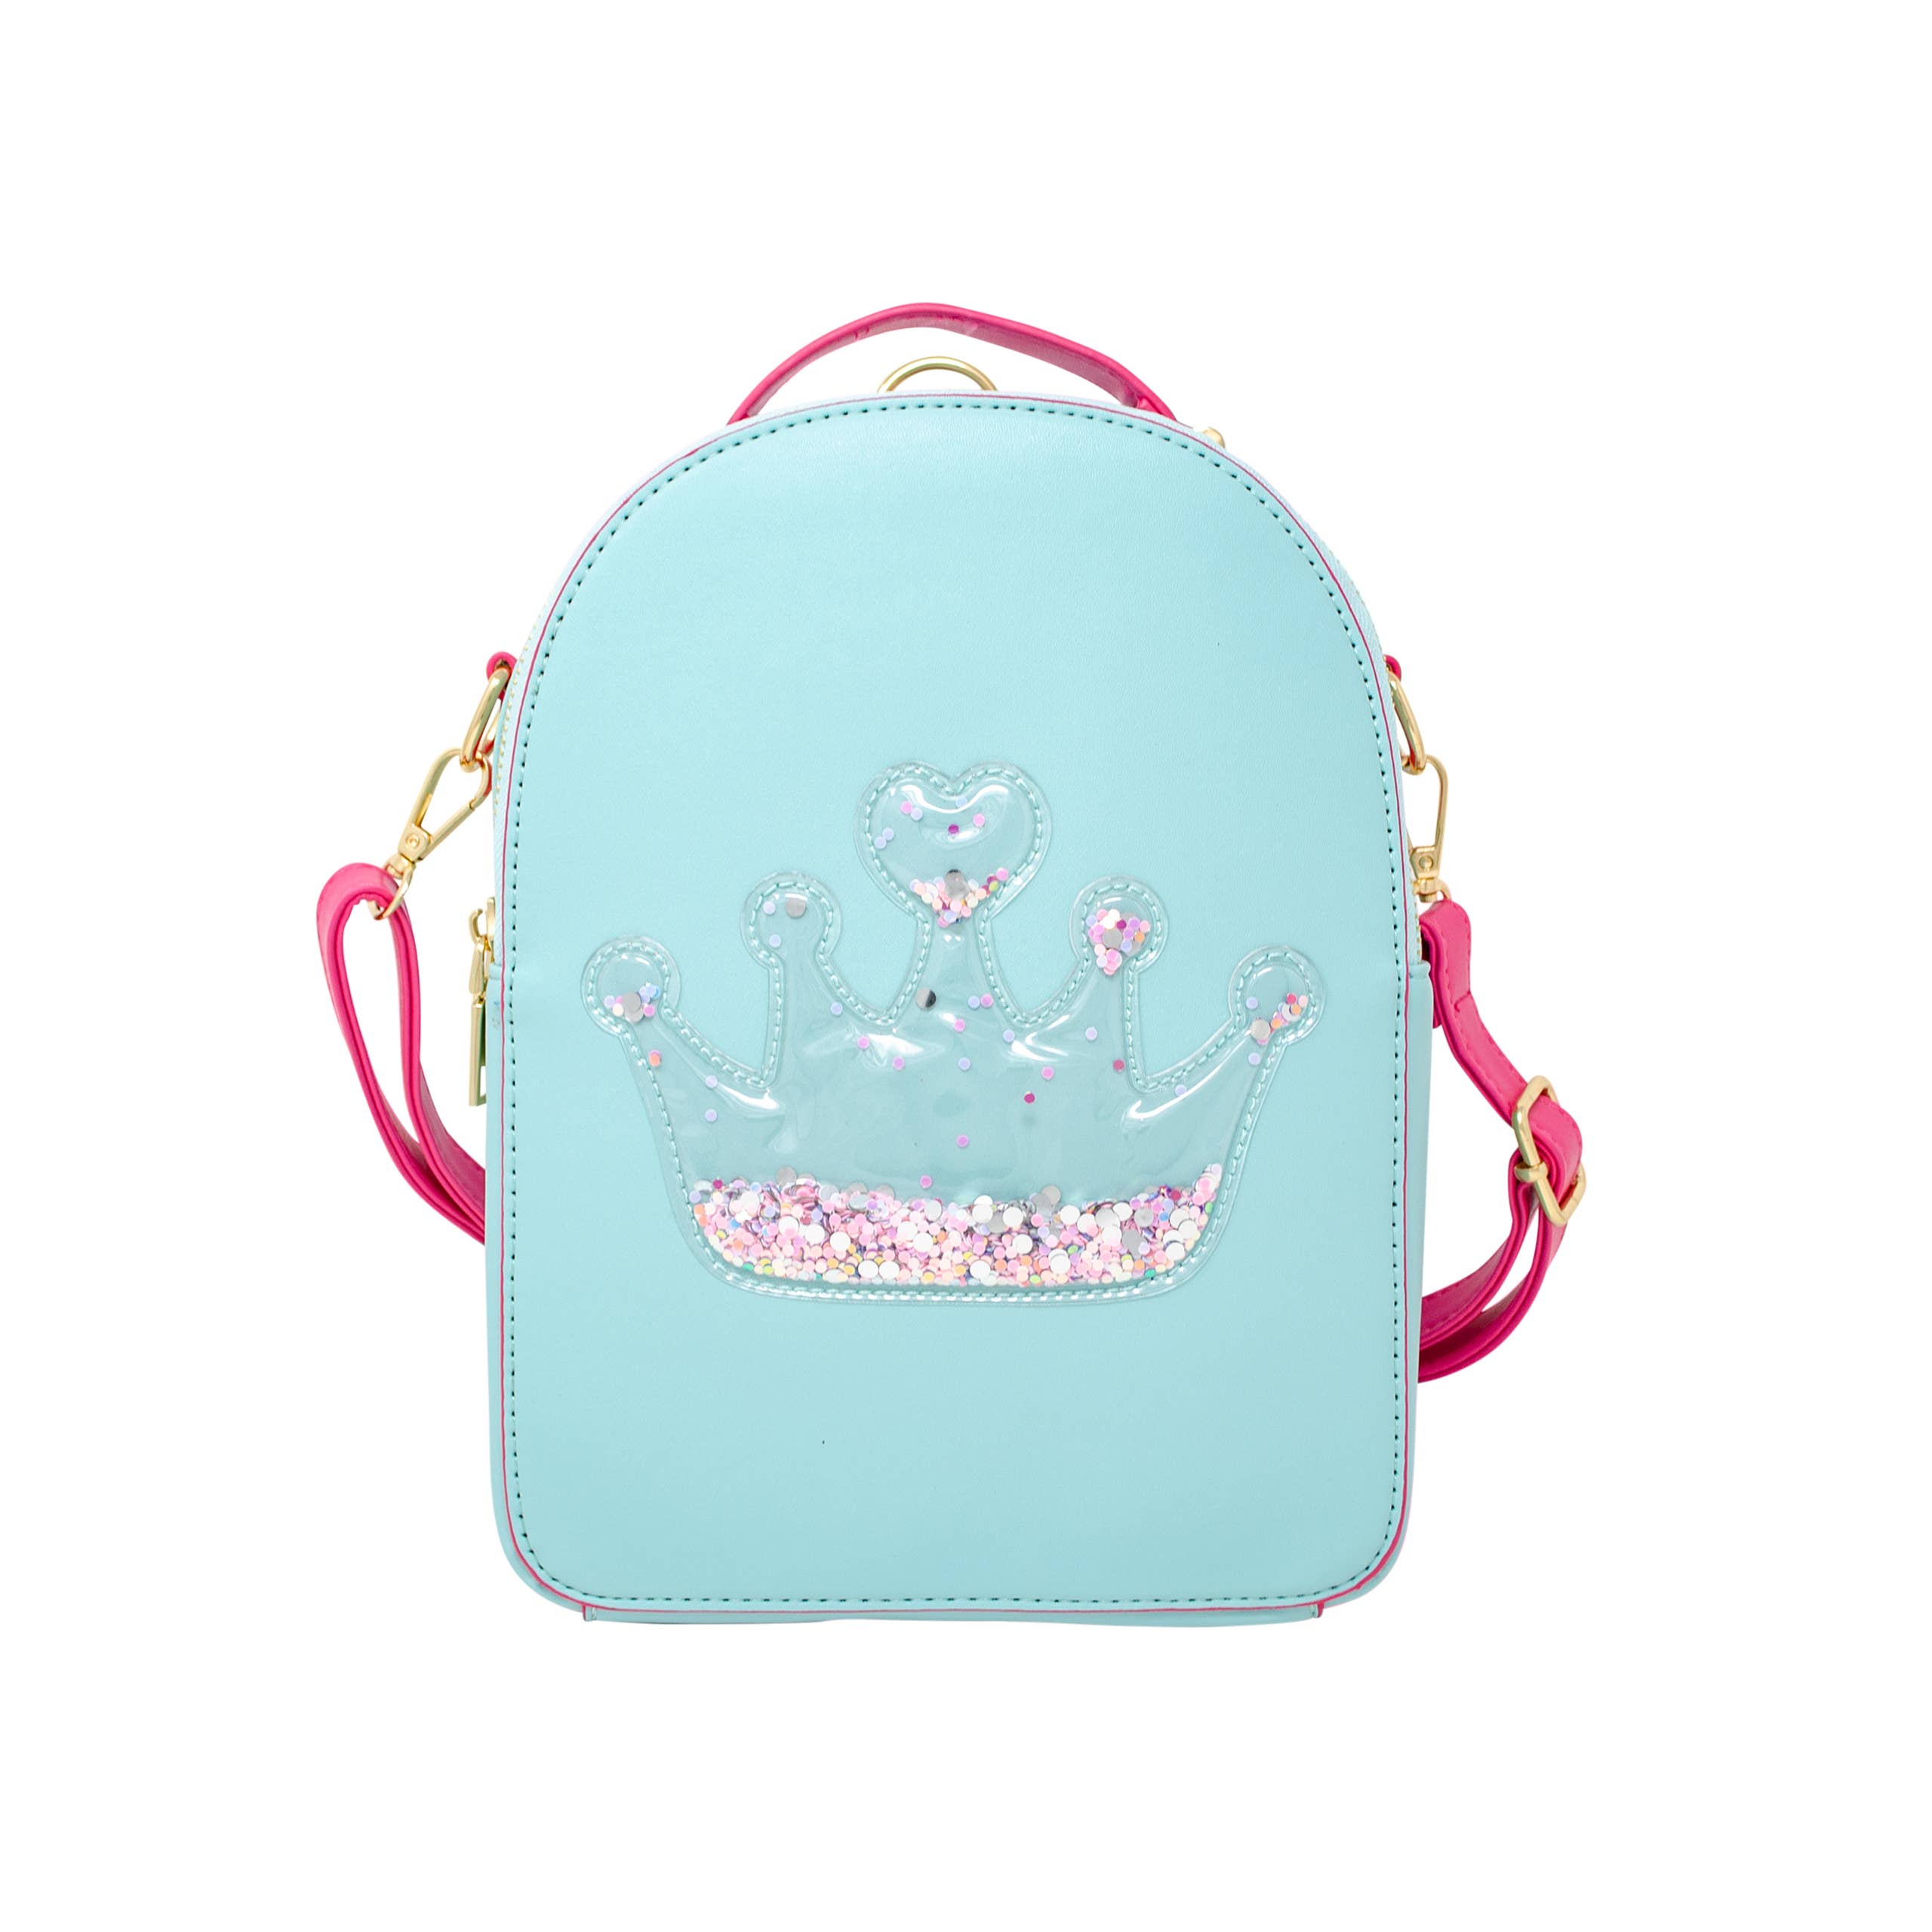 Confetti Backpack Teal